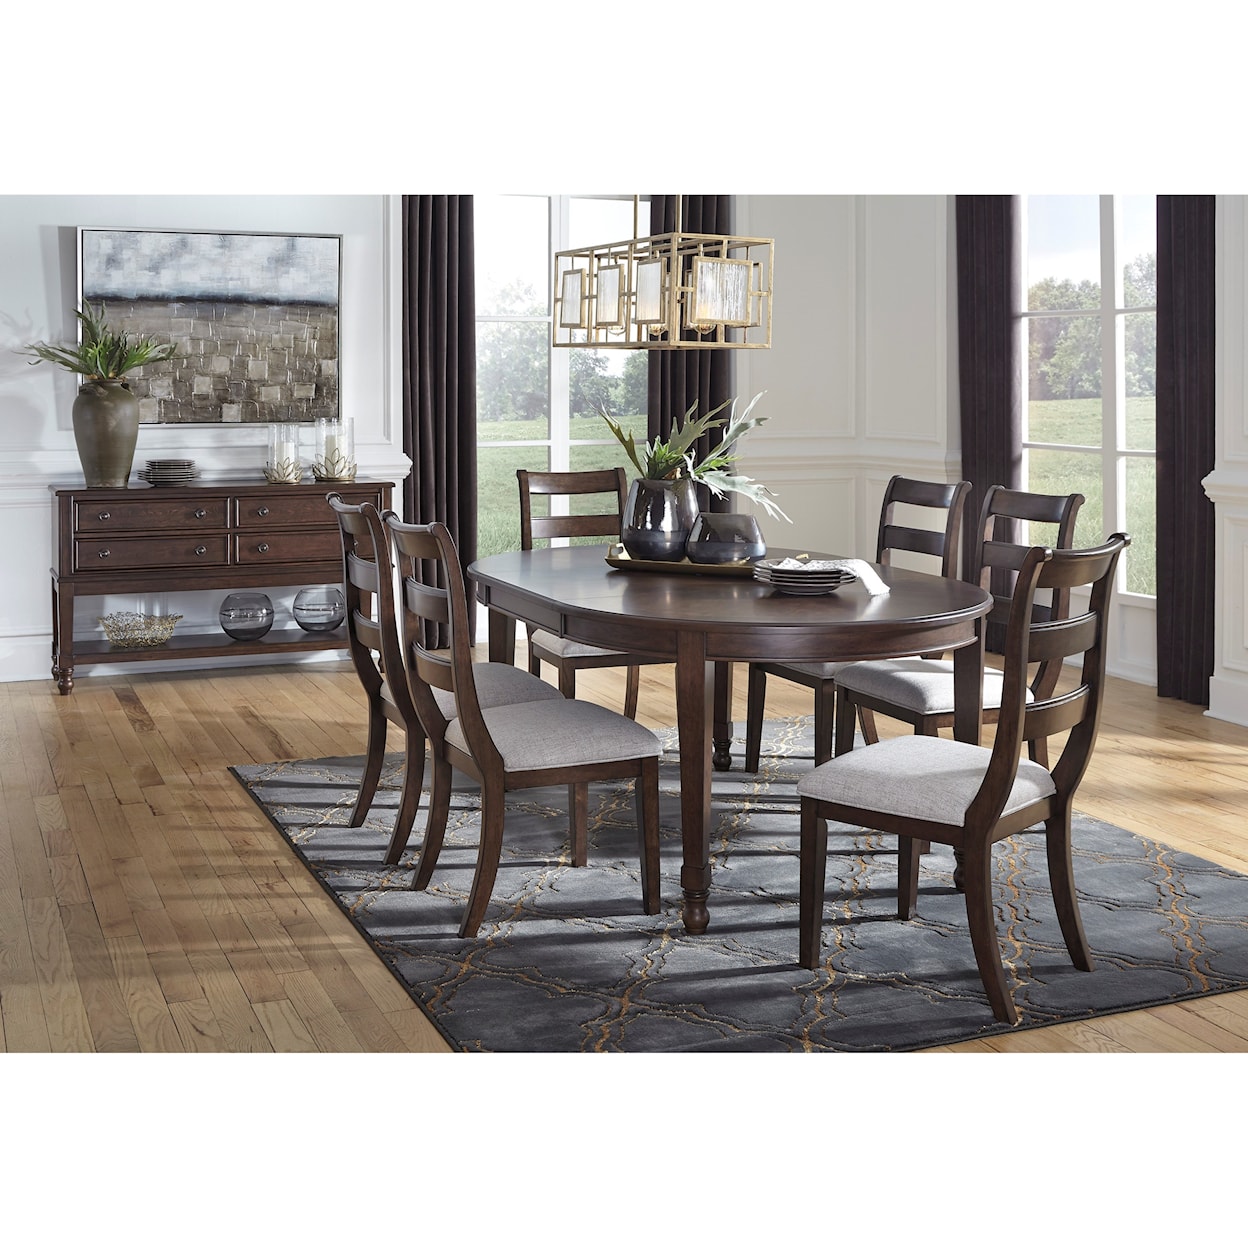 Signature Design by Ashley Adinton Formal Dining Room Group